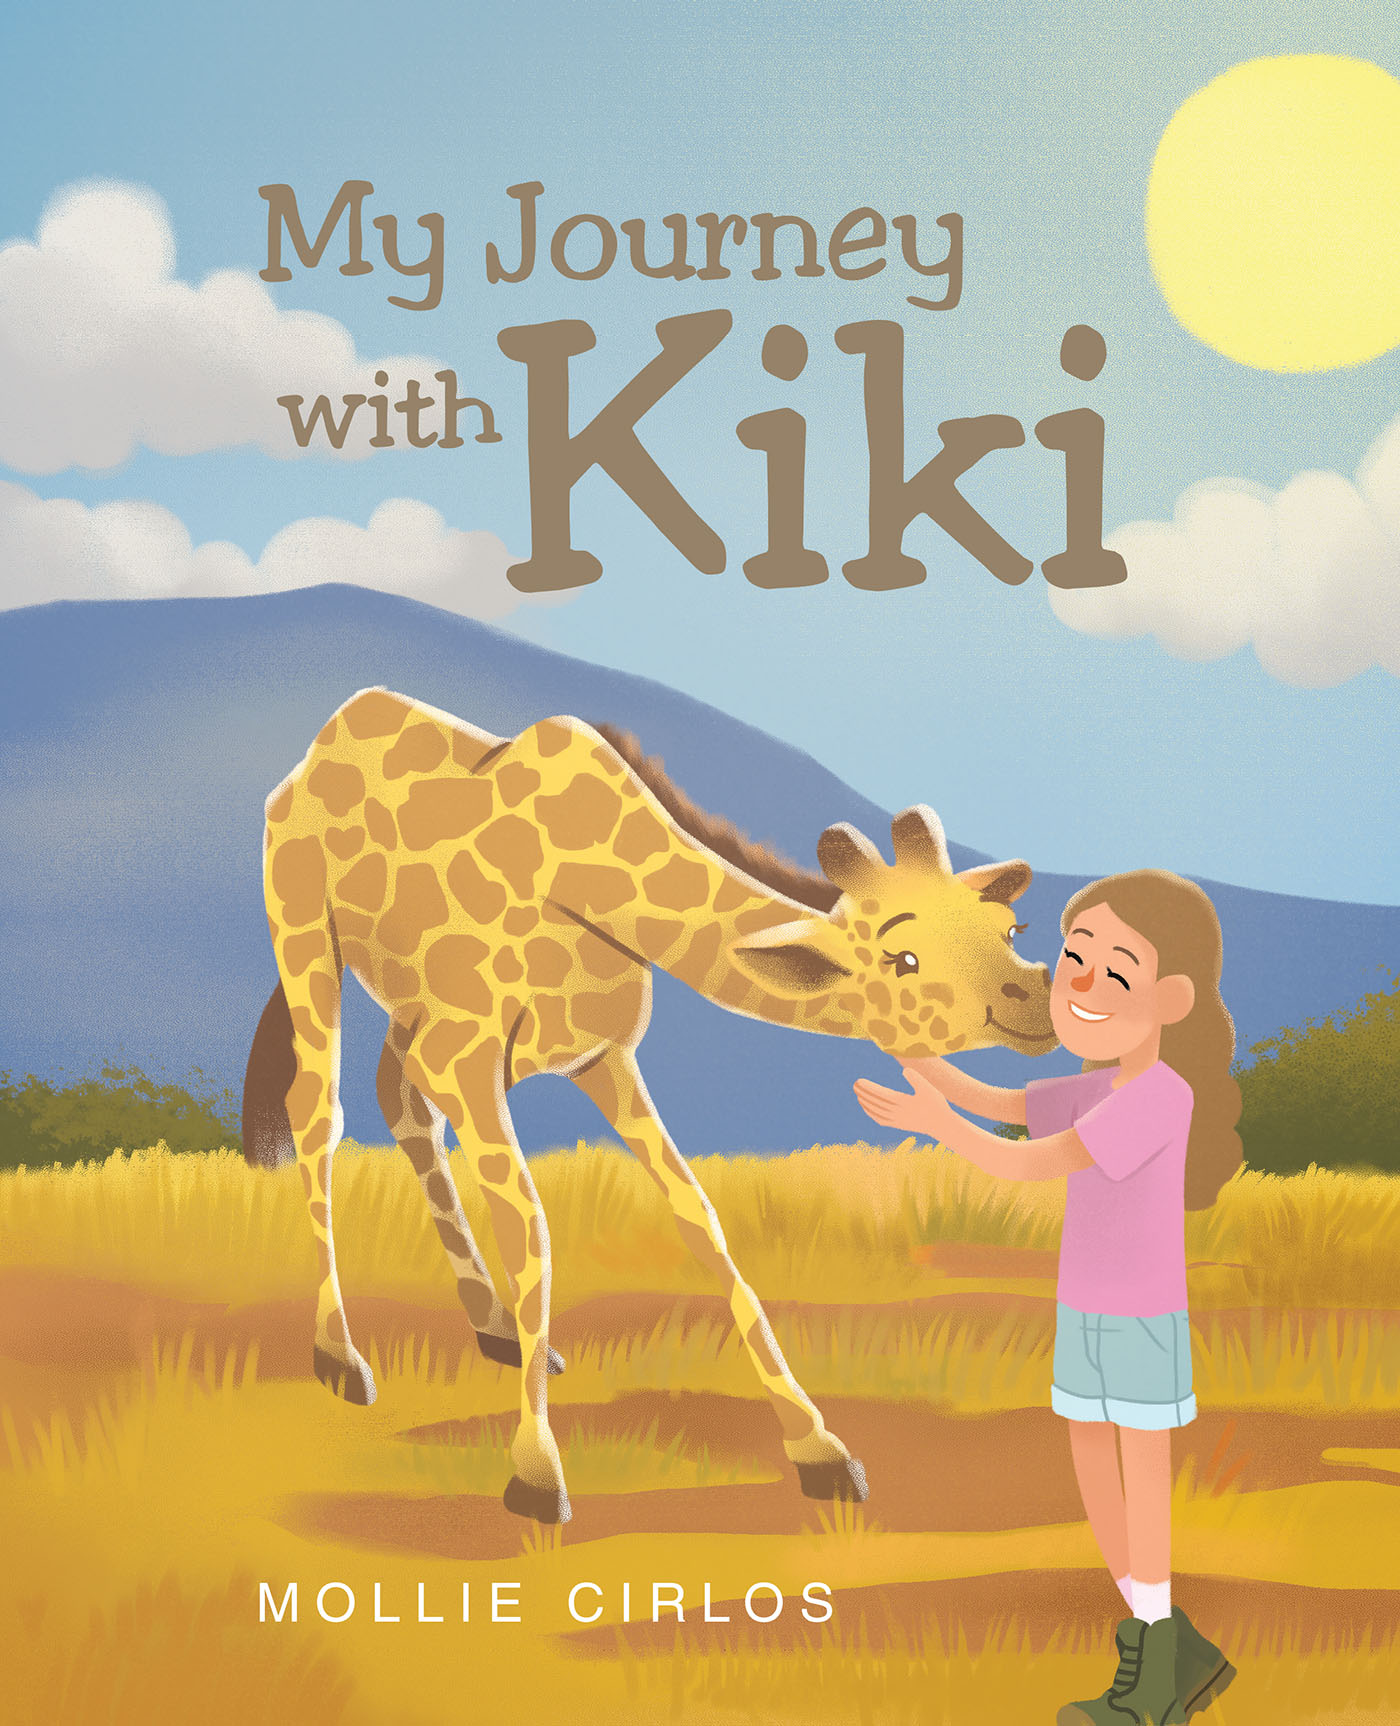 Mollie Cirlos’s Newly Released "My Journey with Kiki" is an Enjoyable Adventure Filled with Fun Facts and Friendship